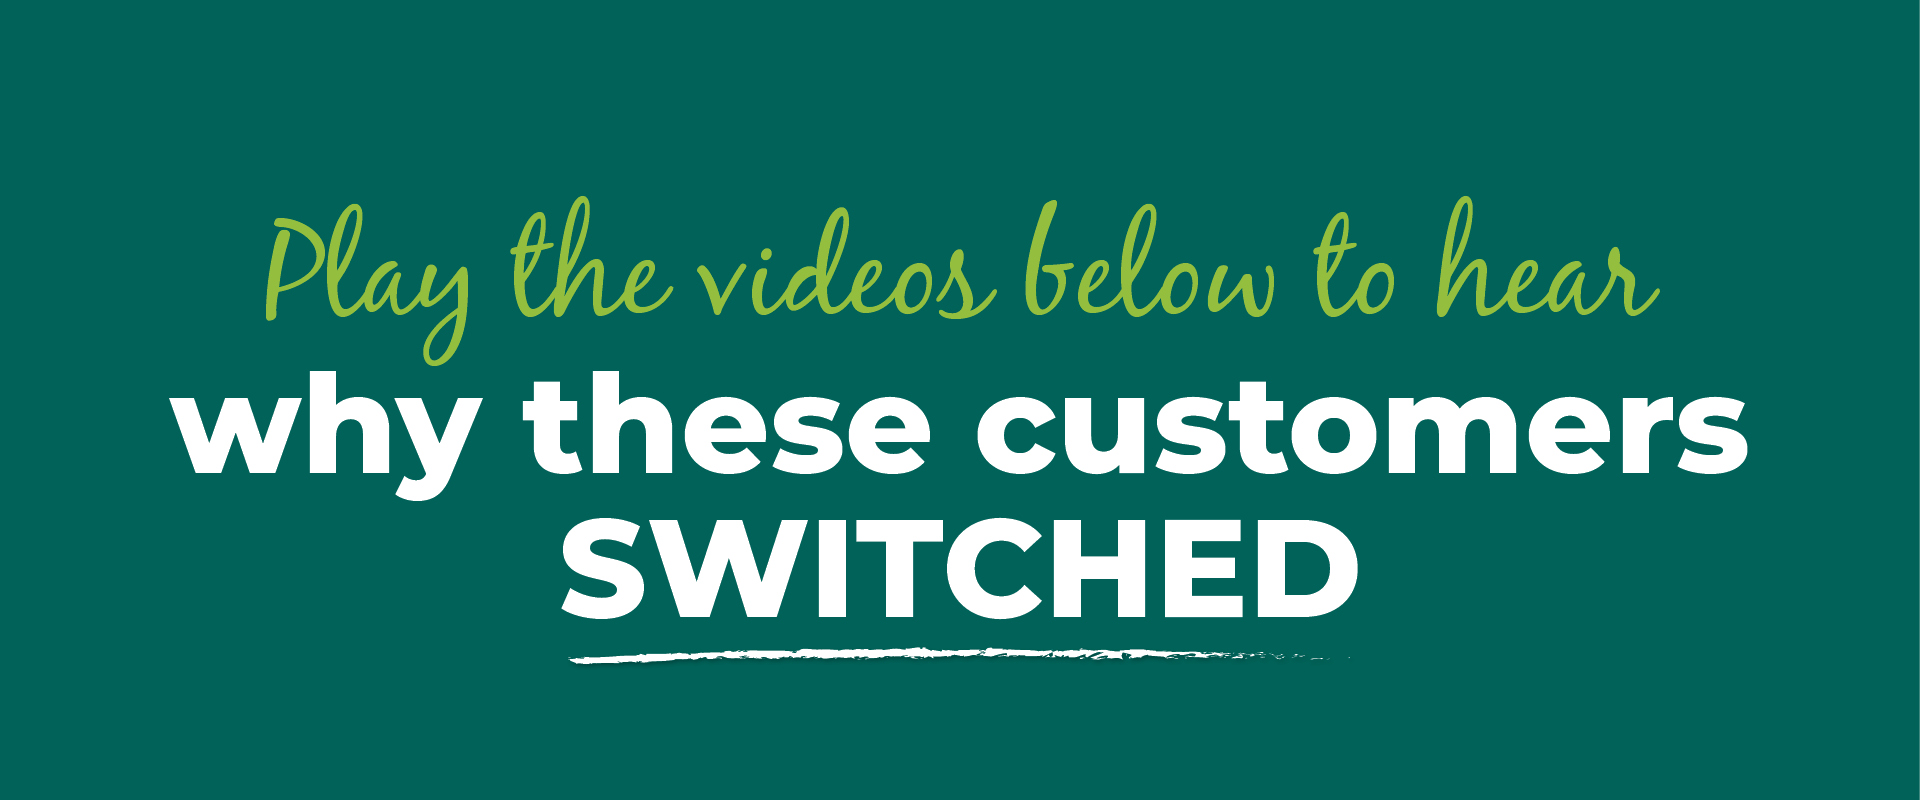 Click the videos below to hear why these customers switched